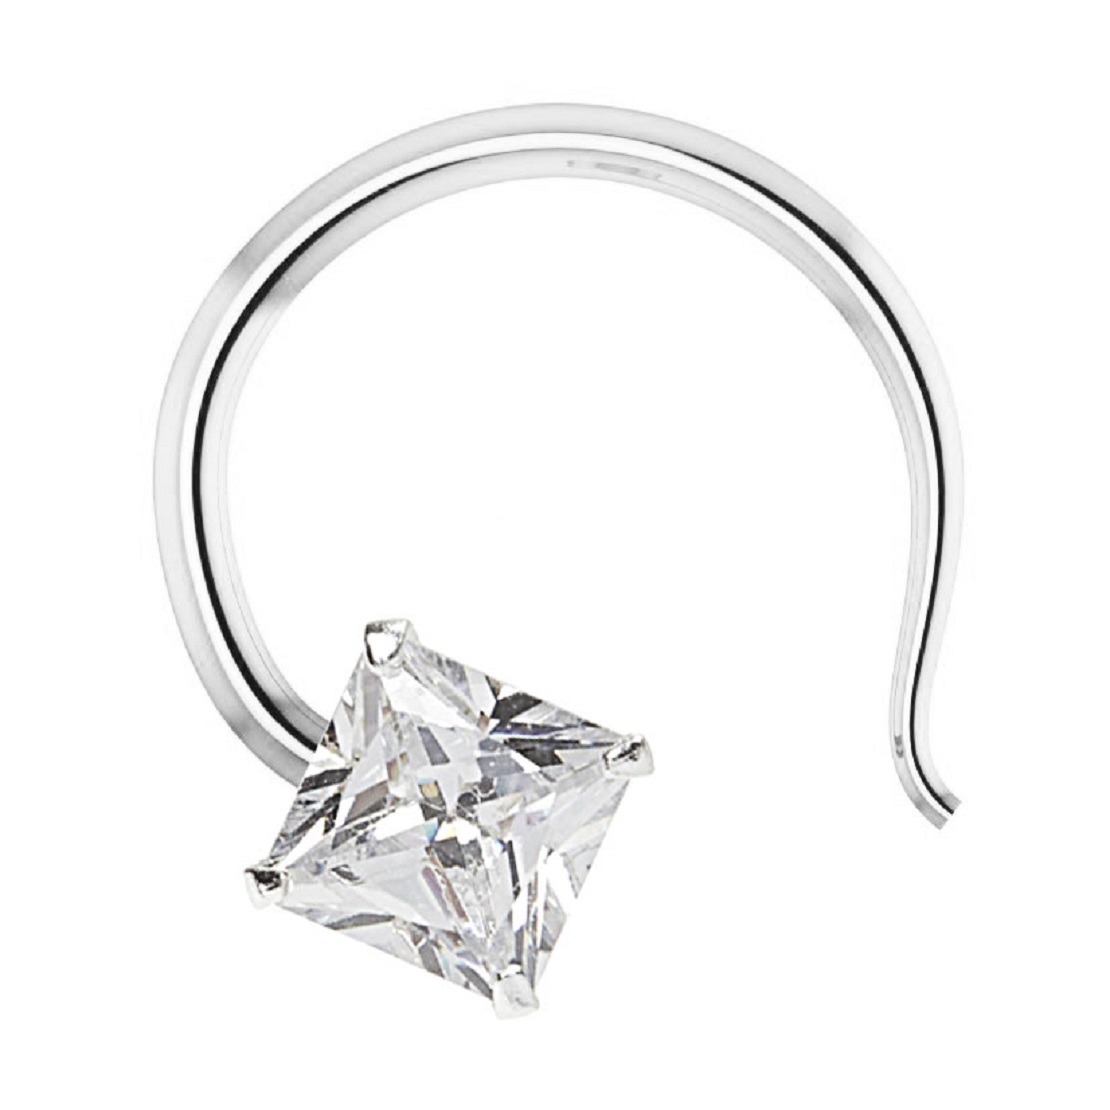 Small Size Piercing Hoop Silver Ball Nose Ring Silver Nath in Pure 92.5 Sterling  Silver (Pack of 10) : Amazon.in: Jewellery